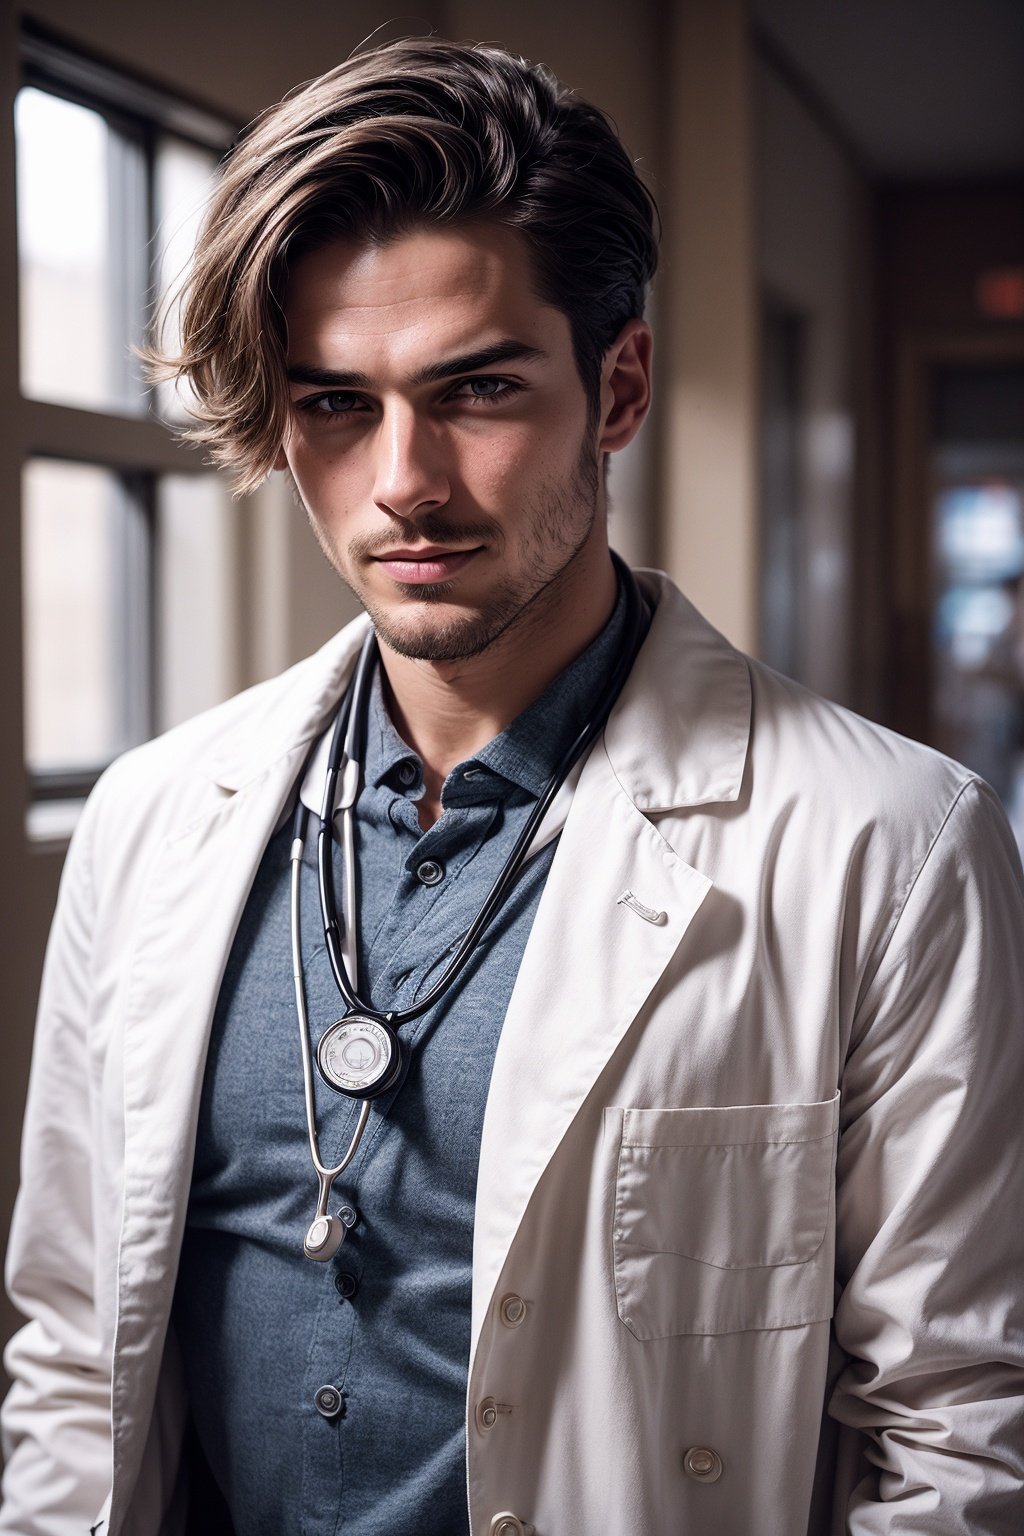  portrait of a handsome doctor with friendly eyes, dressed in a crisp white coat. Soft, natural lighting highlights his chiseled features and emphasizes his caring demeanor. The background showcases a bustling hospital ward, creating a sense of purpose and dedication. Intricate details in the stethoscope and medical equipment add authenticity to the scene.